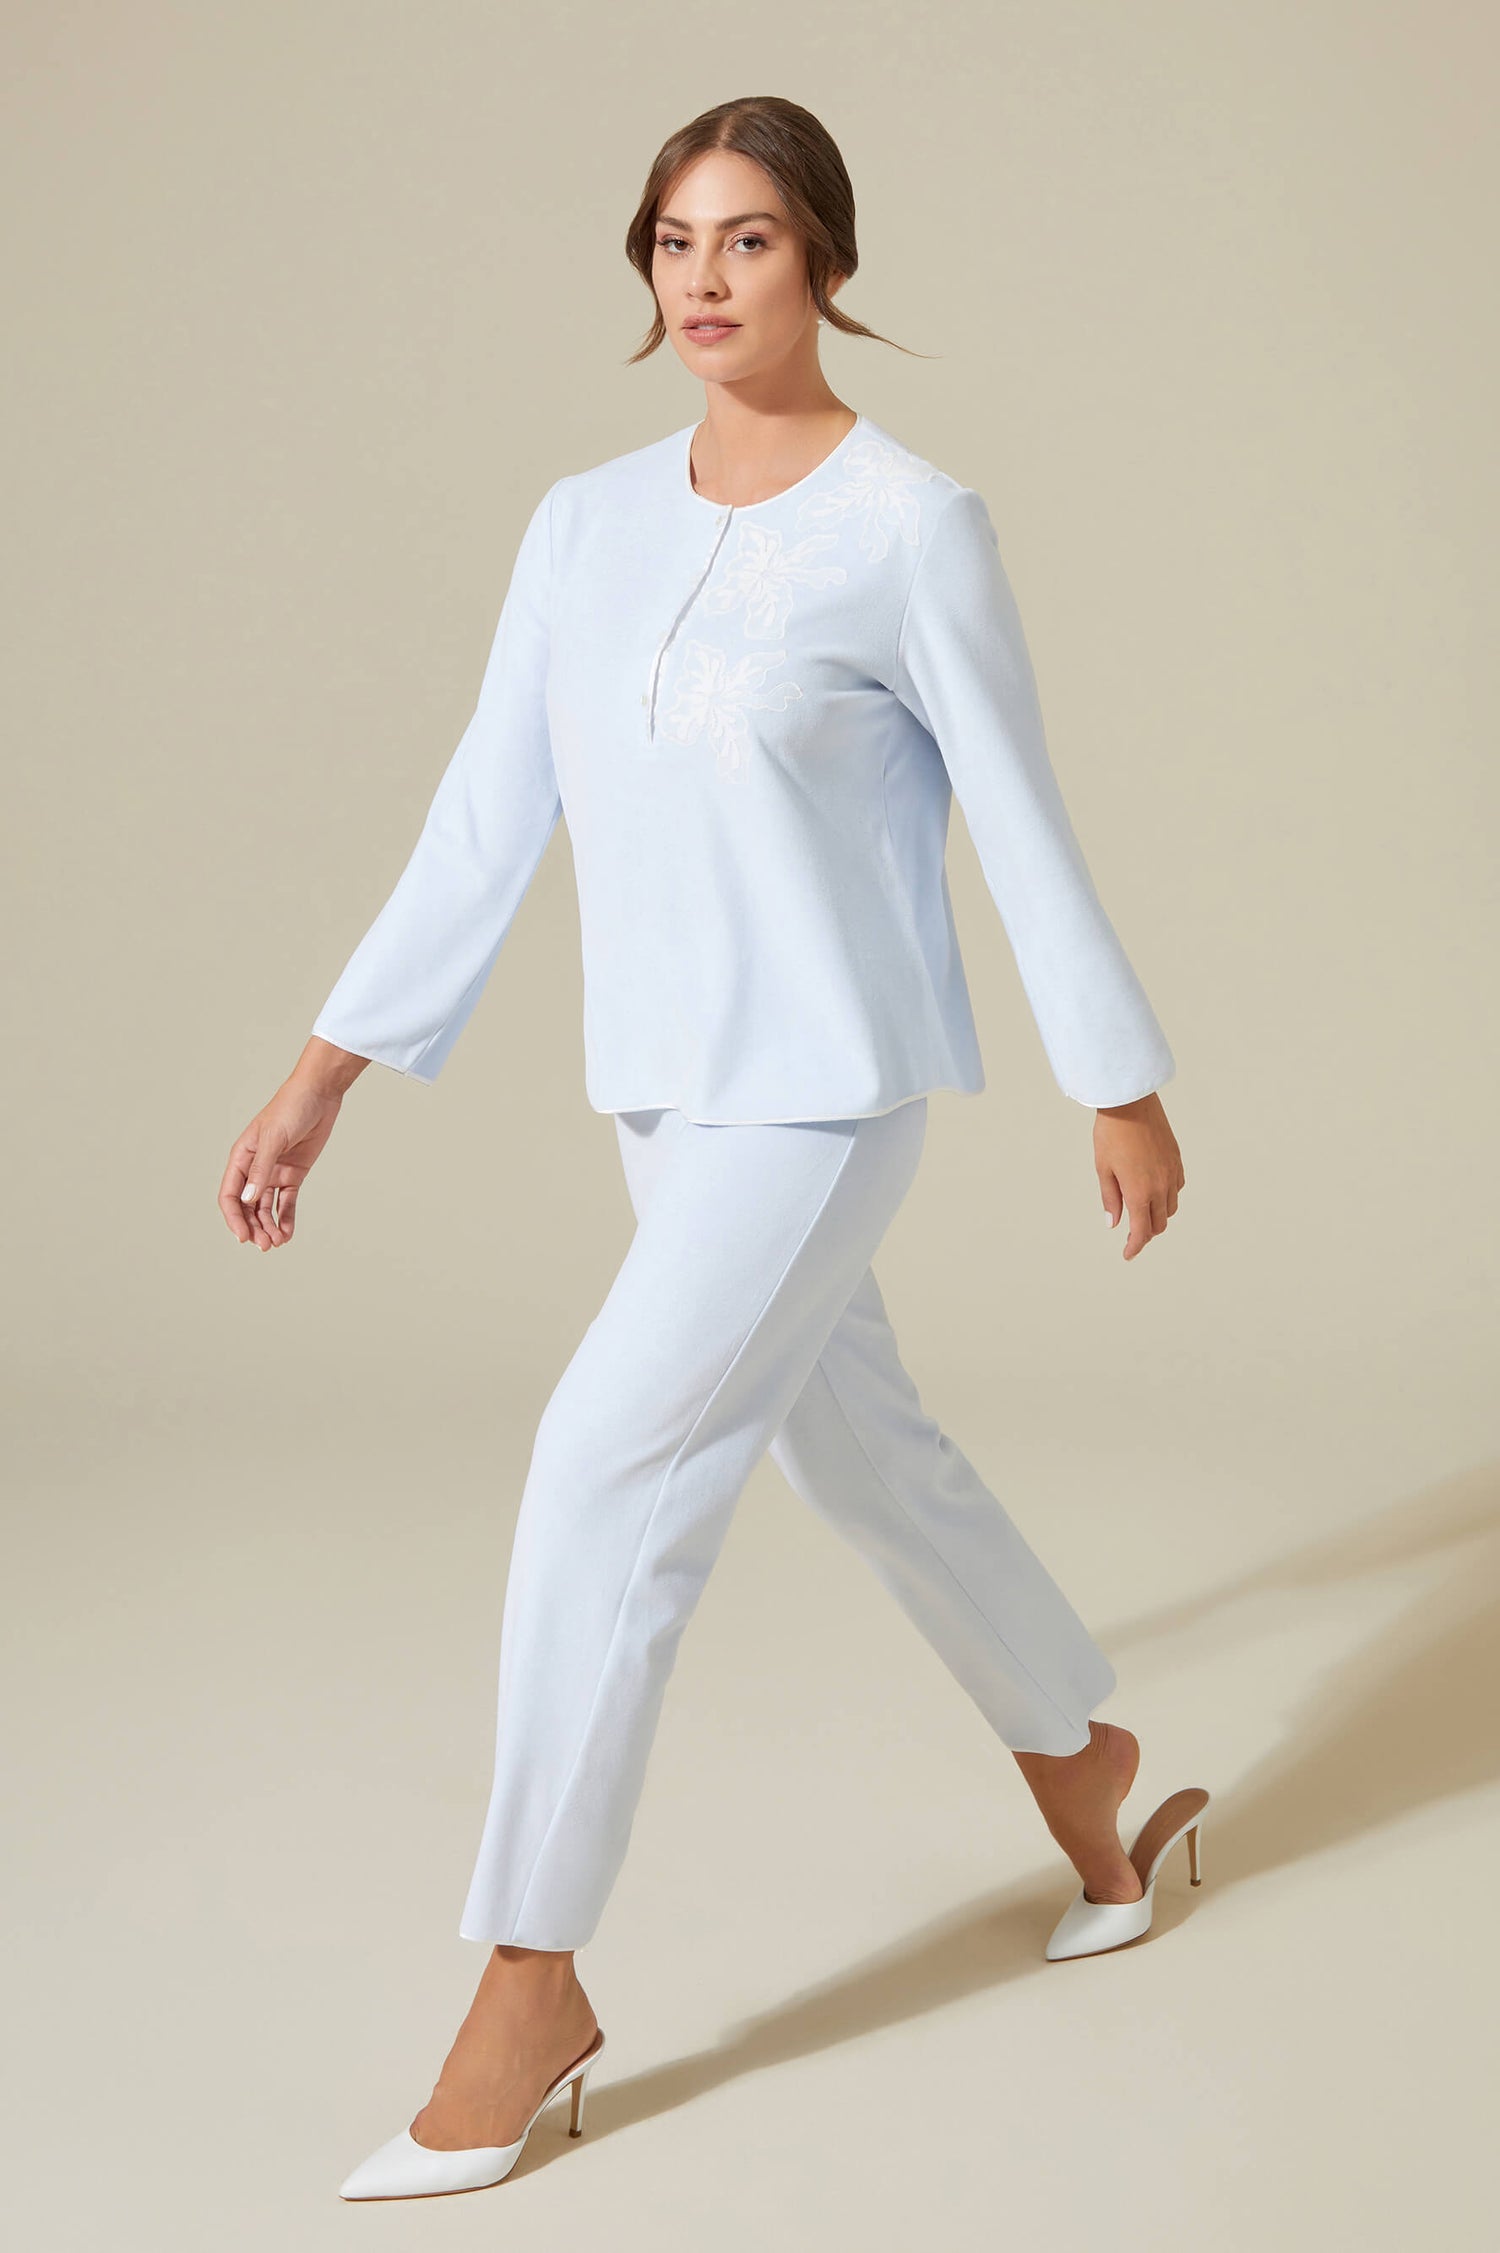 Maya Trimmed and Buttoned Velvet PJ Set - Off White on Baby Blue